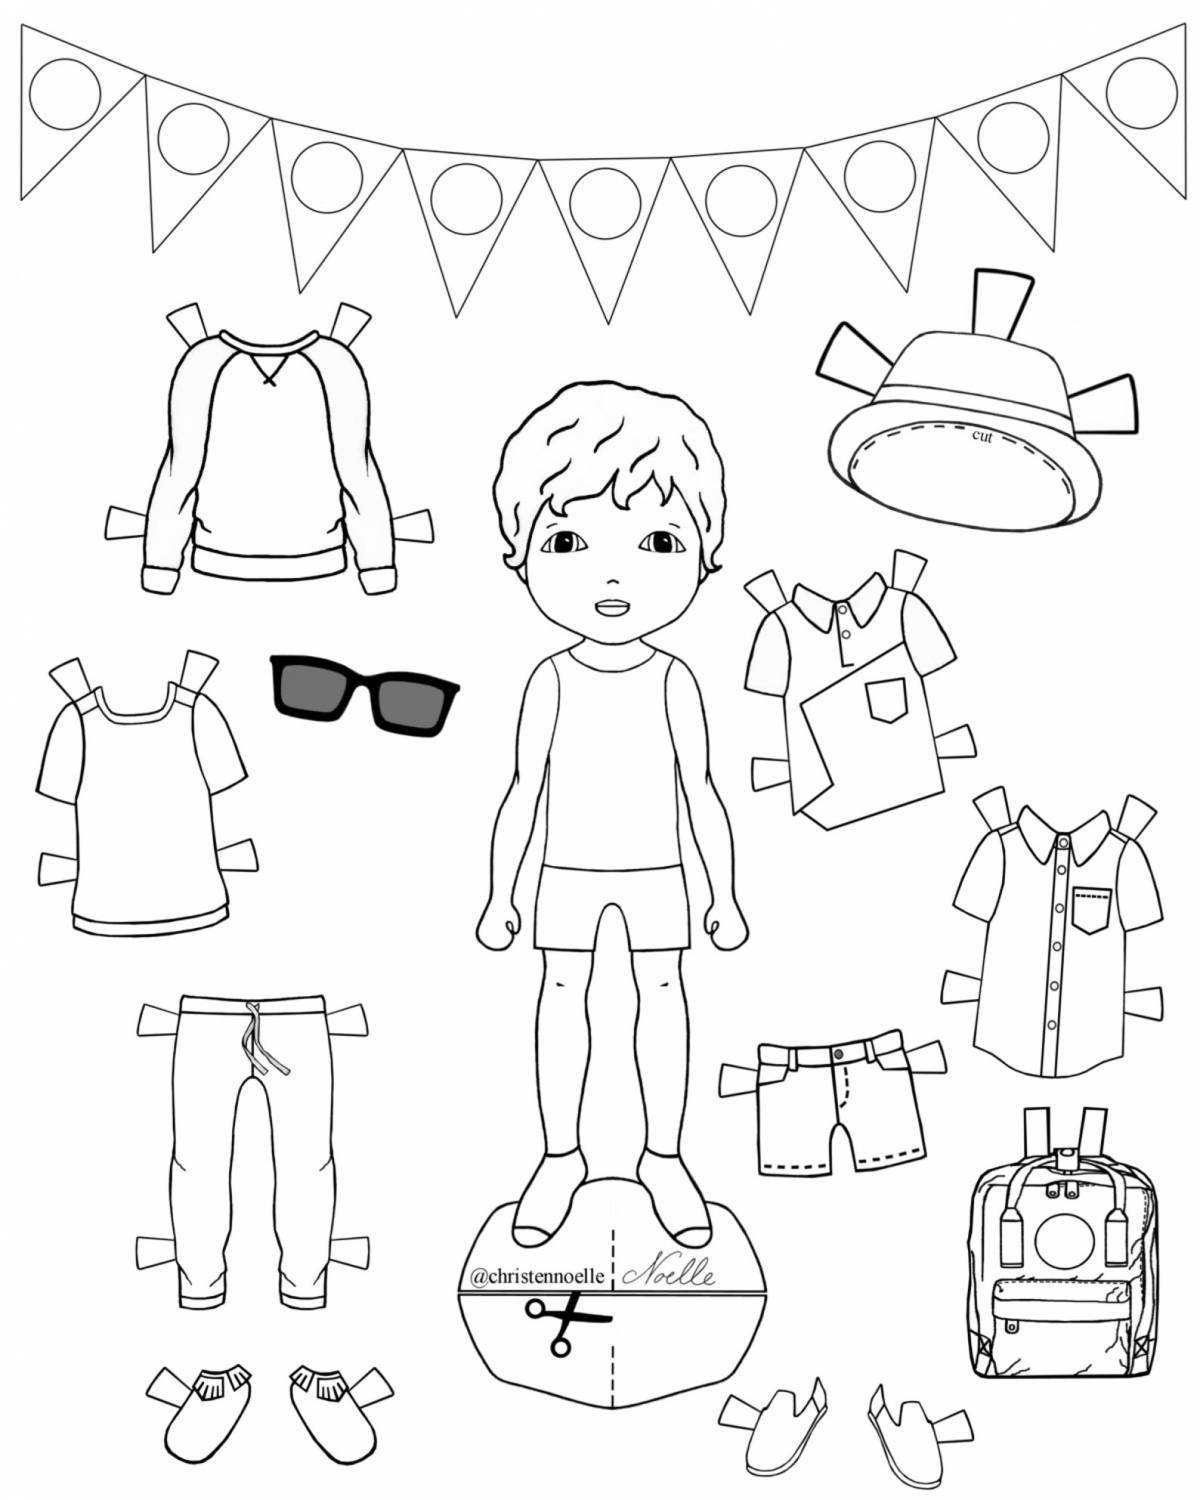 Paper doll boy with cutout clothes #4